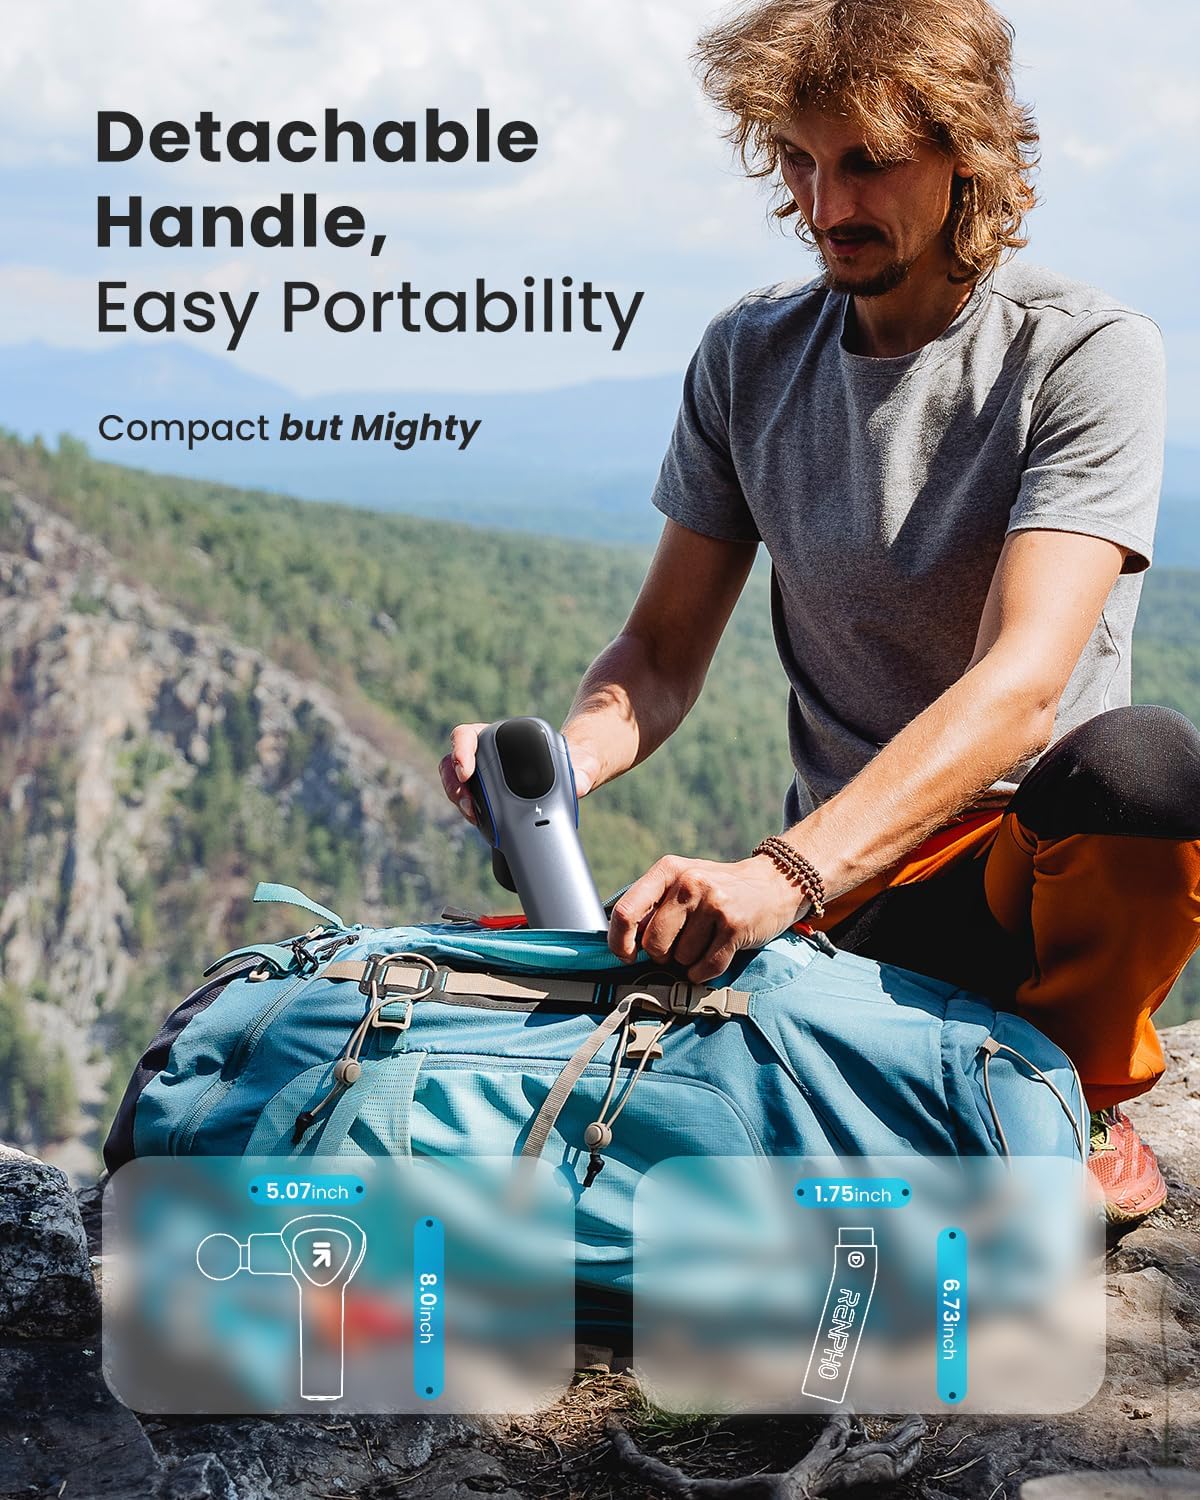 A man crouches on a rocky overlook, holding a Renpho Reach Massage Gun near a large blue duffle bag. The landscape features lush mountains under a clear sky. Diagrams highlight the device by Renpho EU.